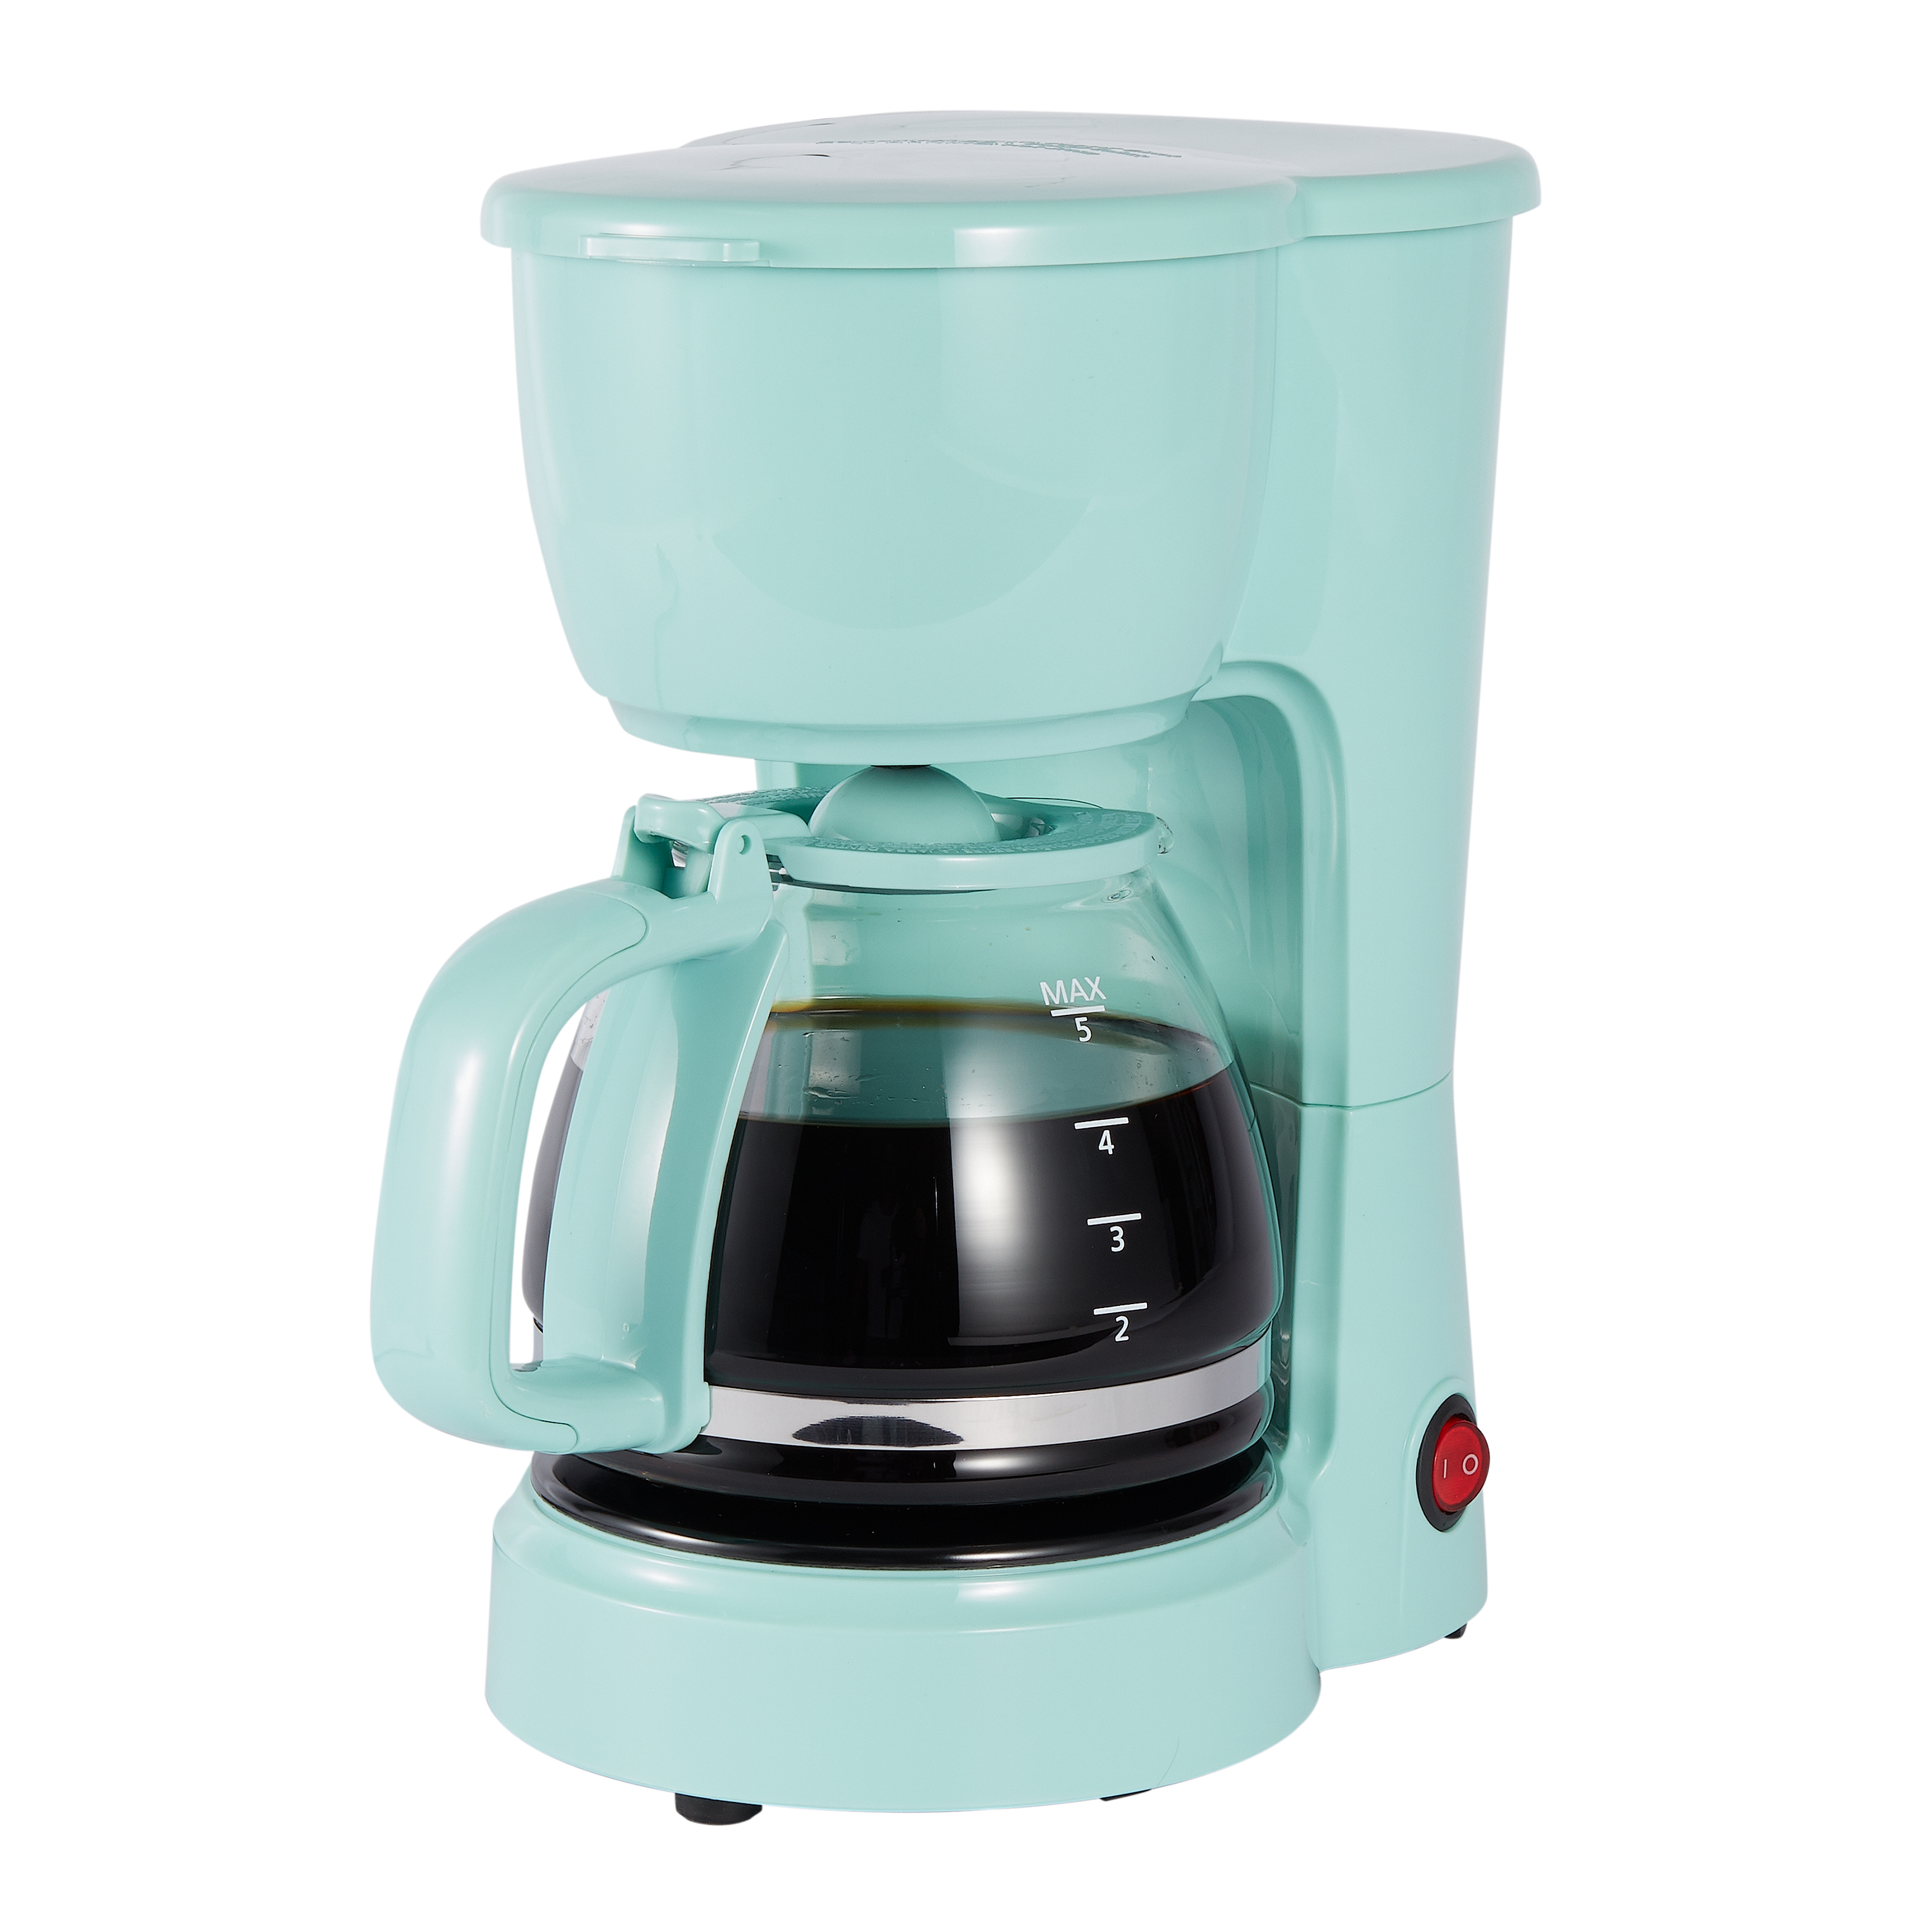 Mainstays 5-Cup Glass Carafe Coffee Maker, Mint Green - image 1 of 6